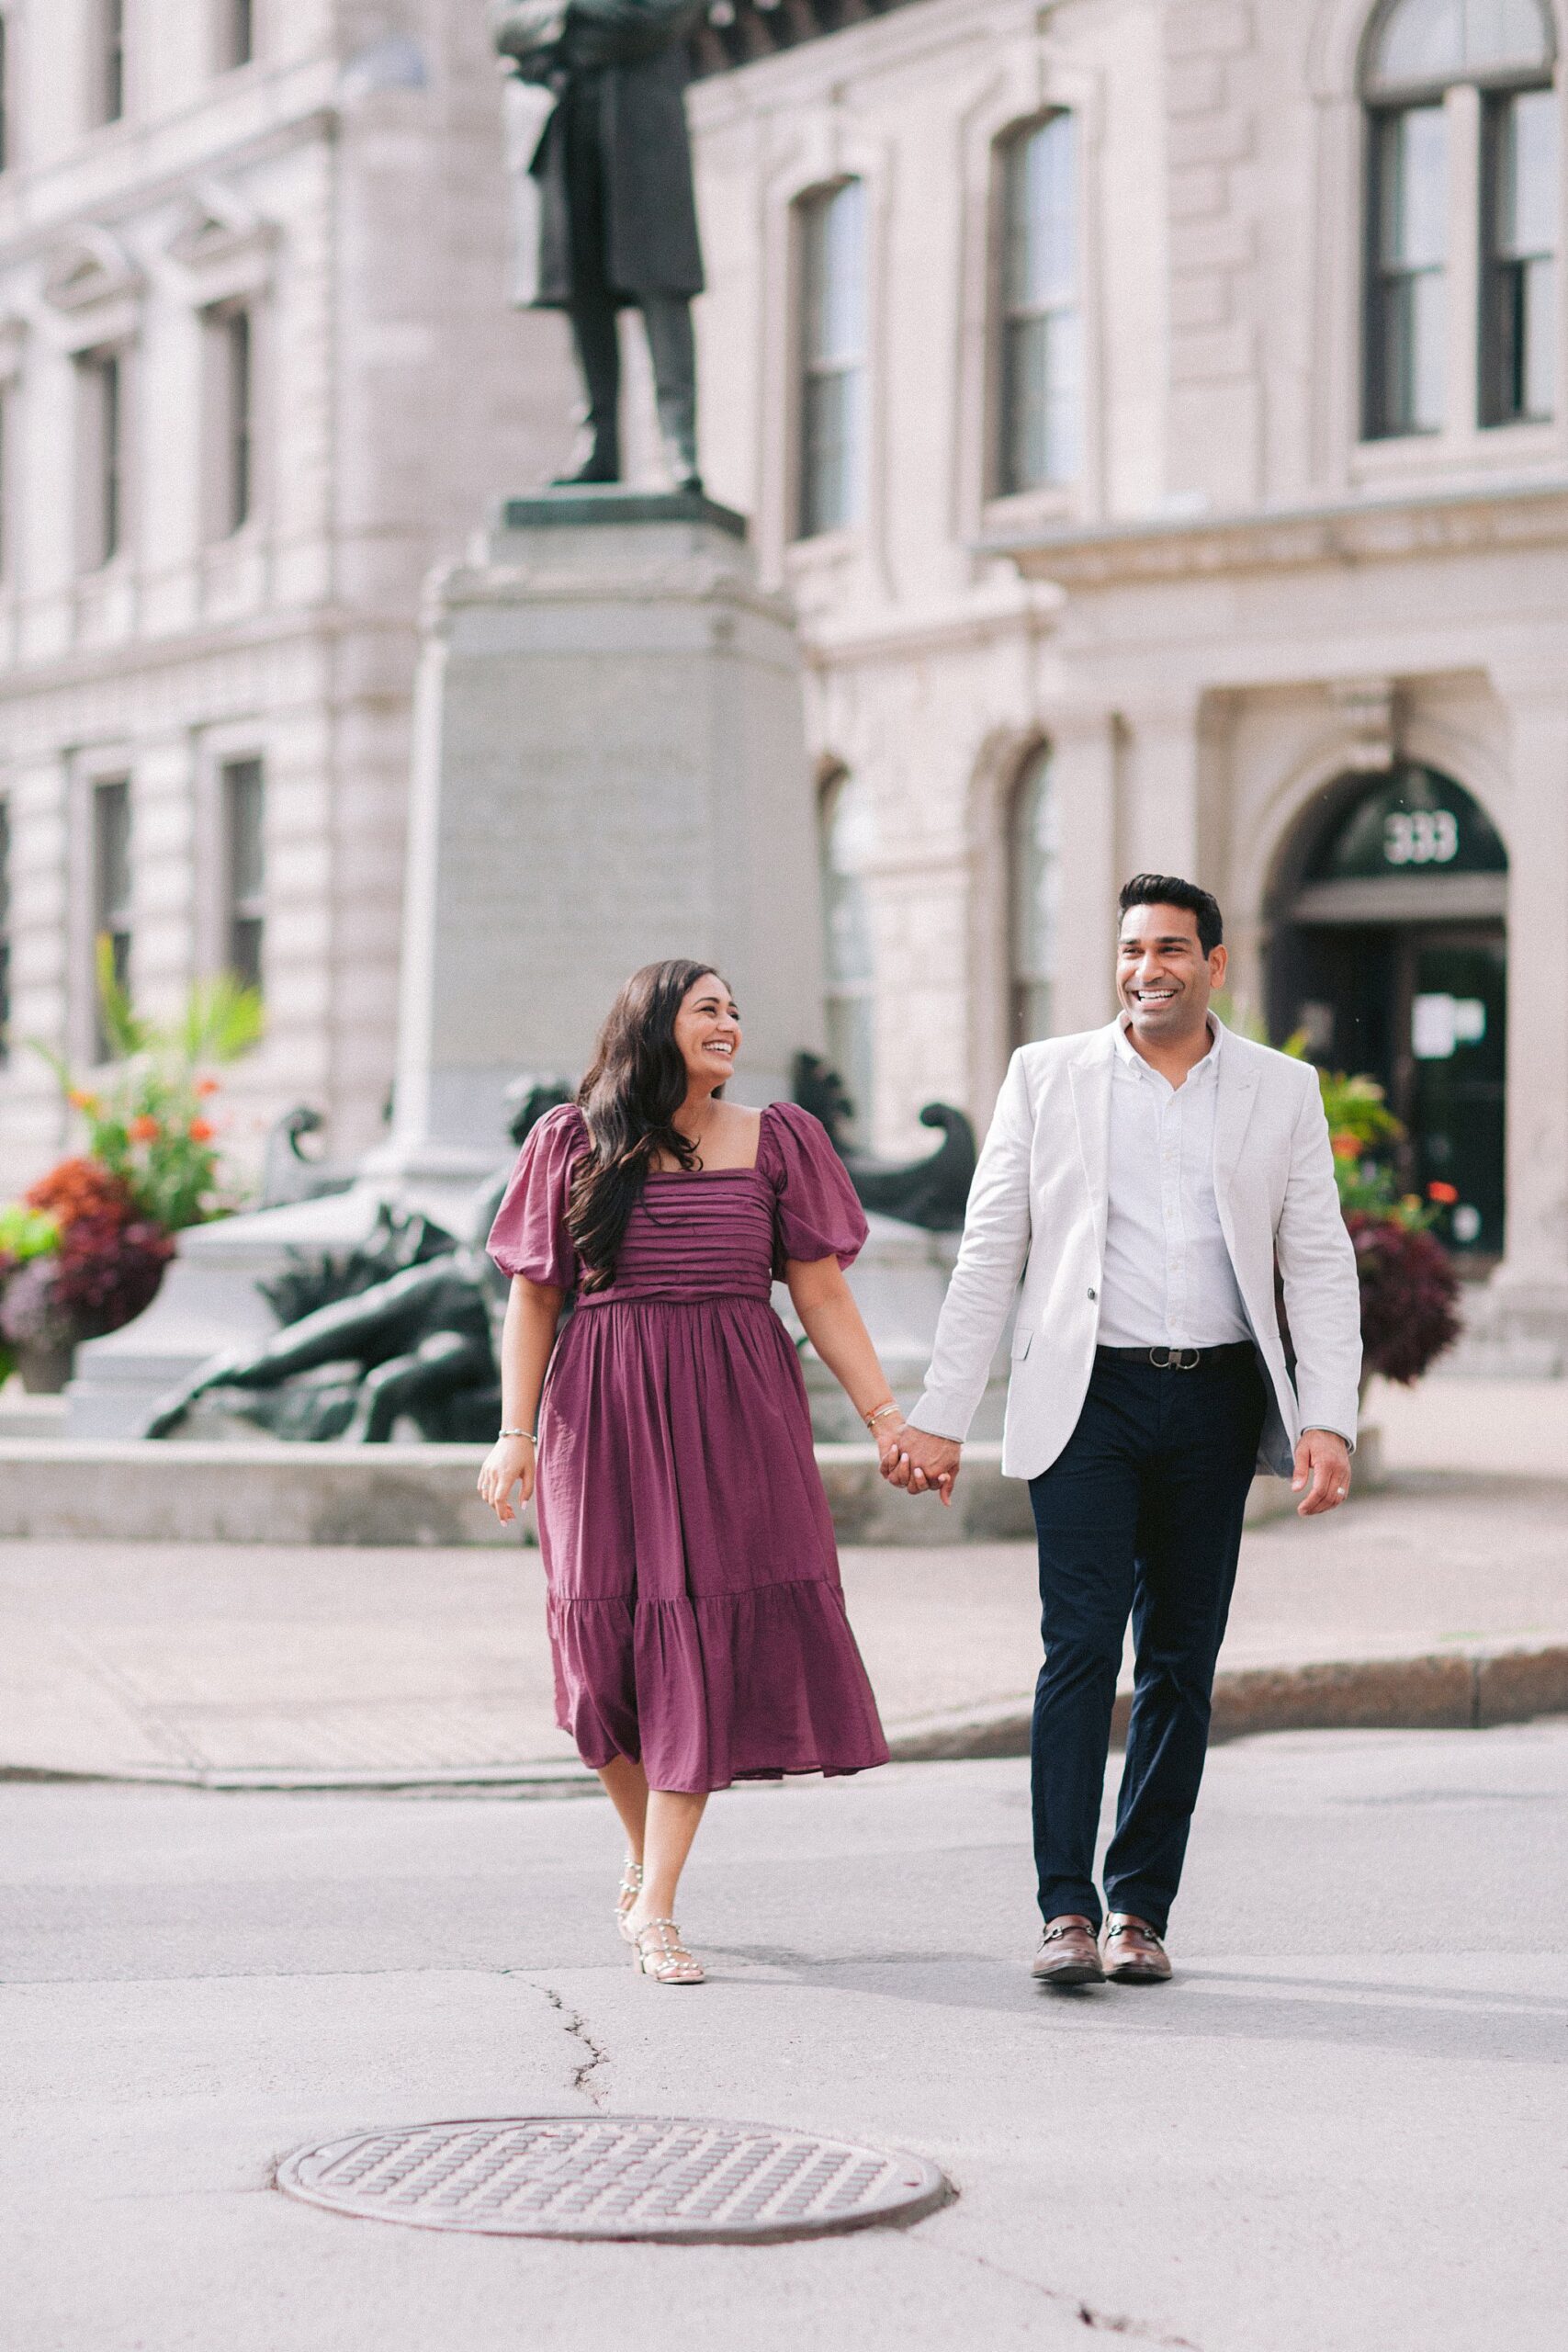 Lovebirds in Montreal: Captured moments from their engagement